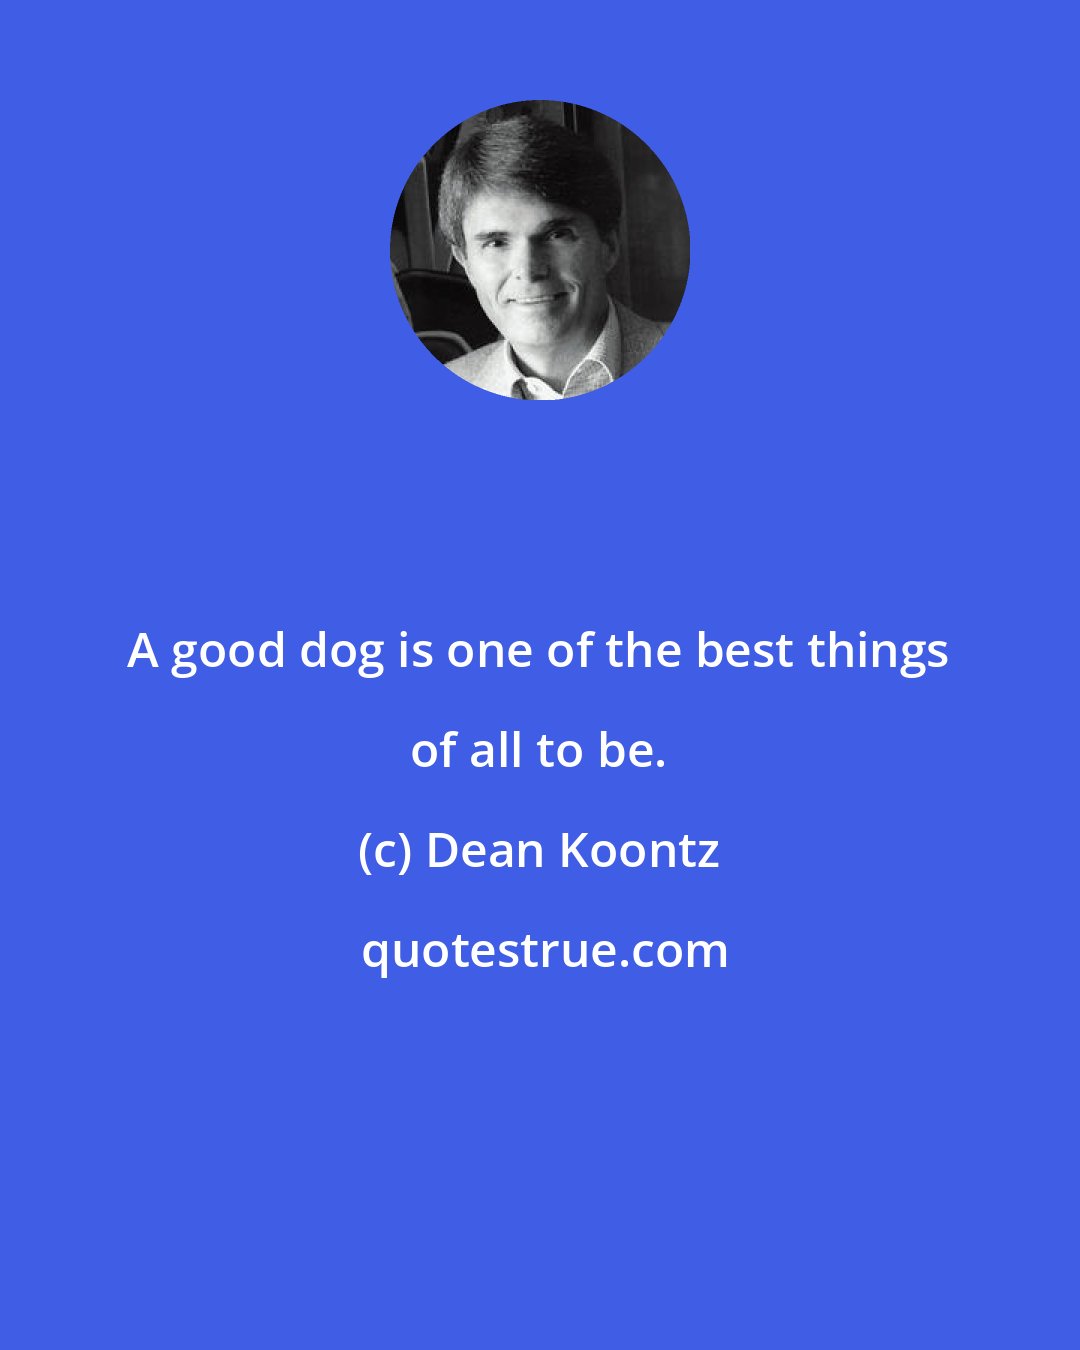 Dean Koontz: A good dog is one of the best things of all to be.